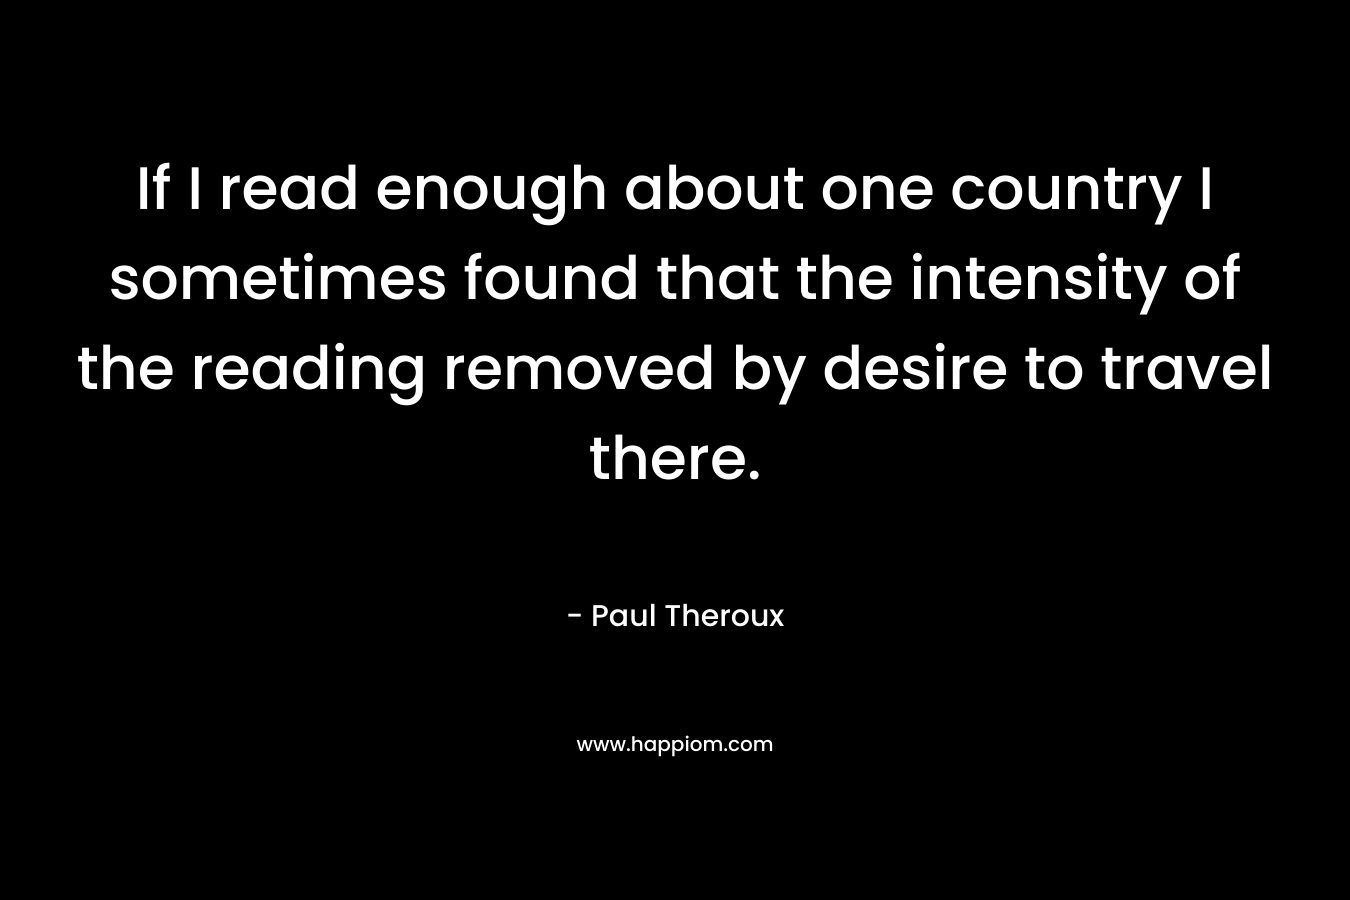 If I read enough about one country I sometimes found that the intensity of the reading removed by desire to travel there. – Paul Theroux